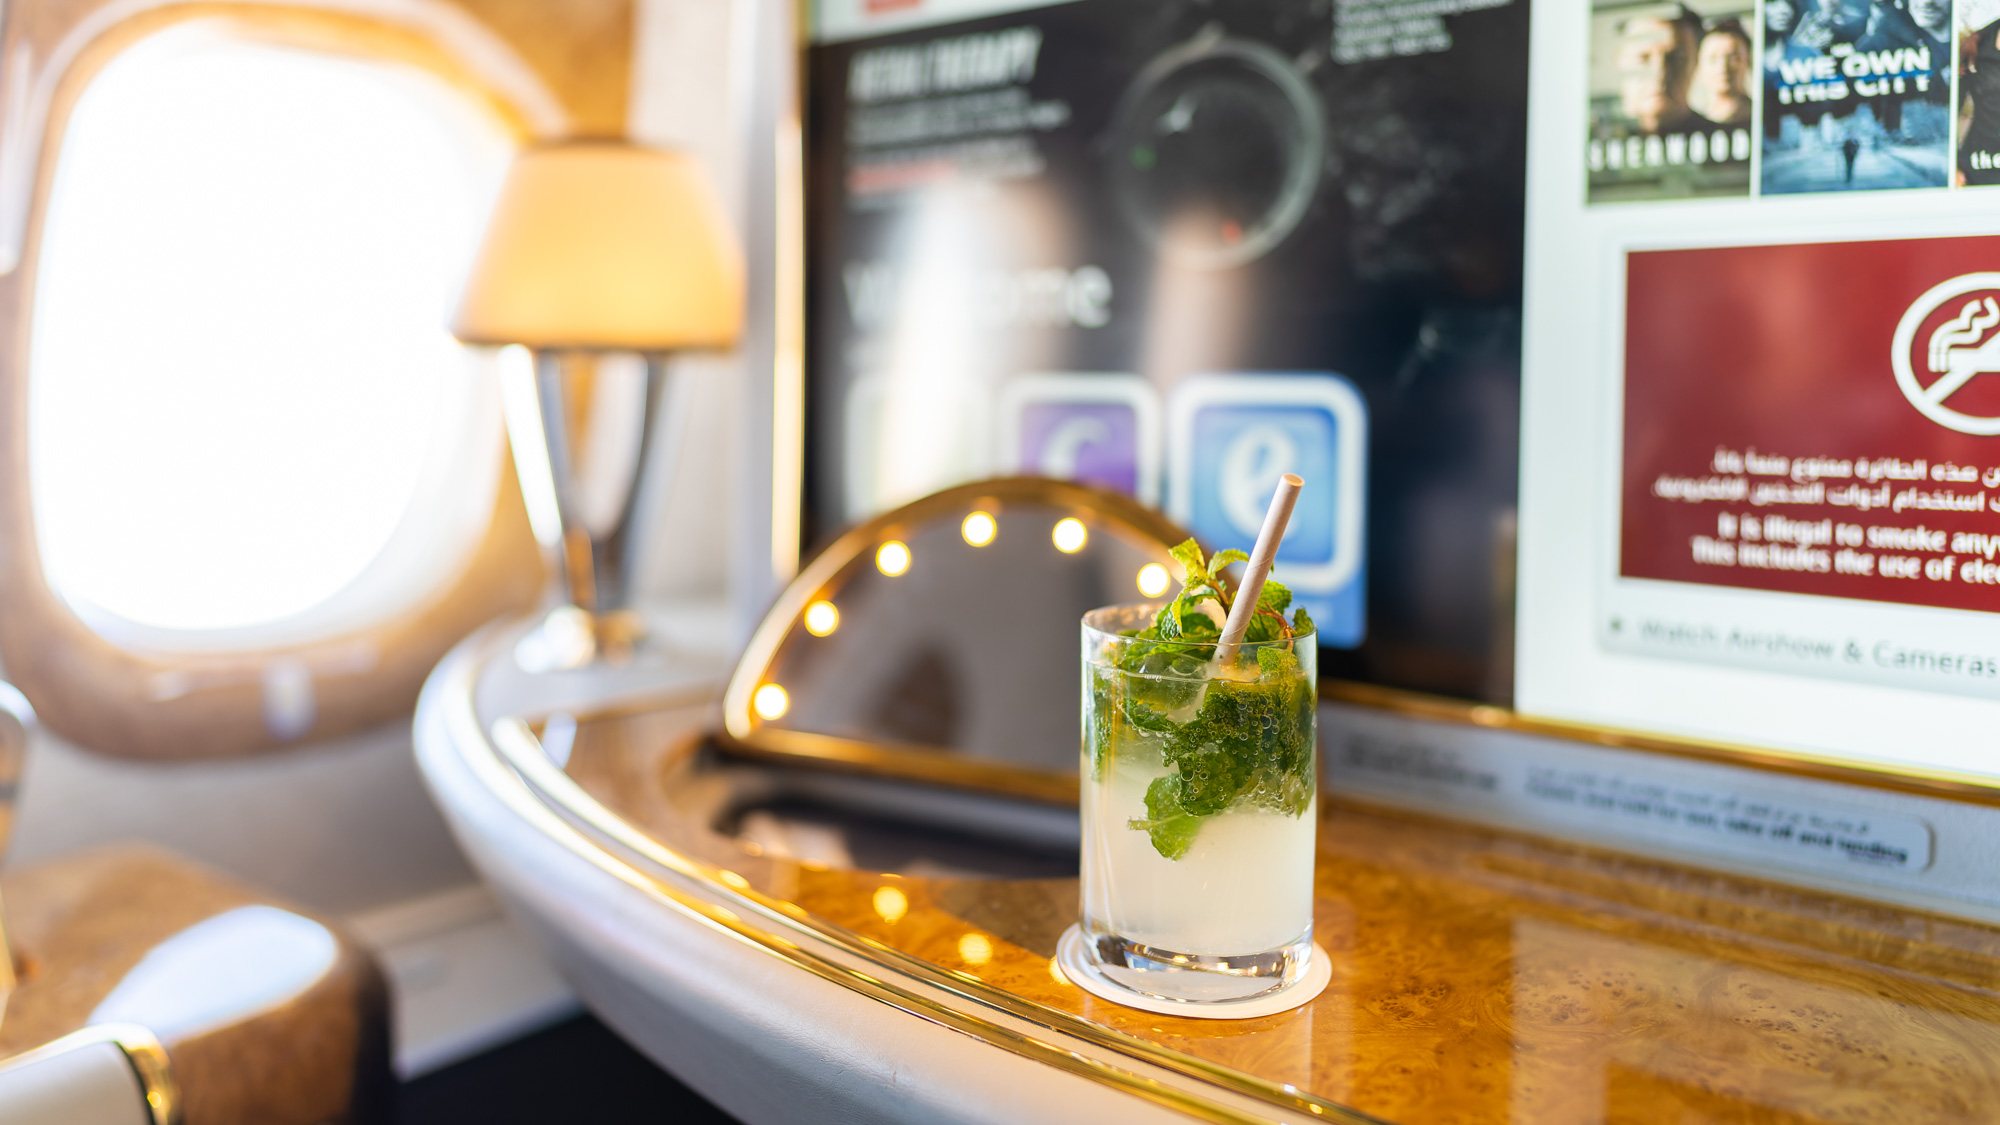 Emirates Boeing 777 First Class virgin mojito.